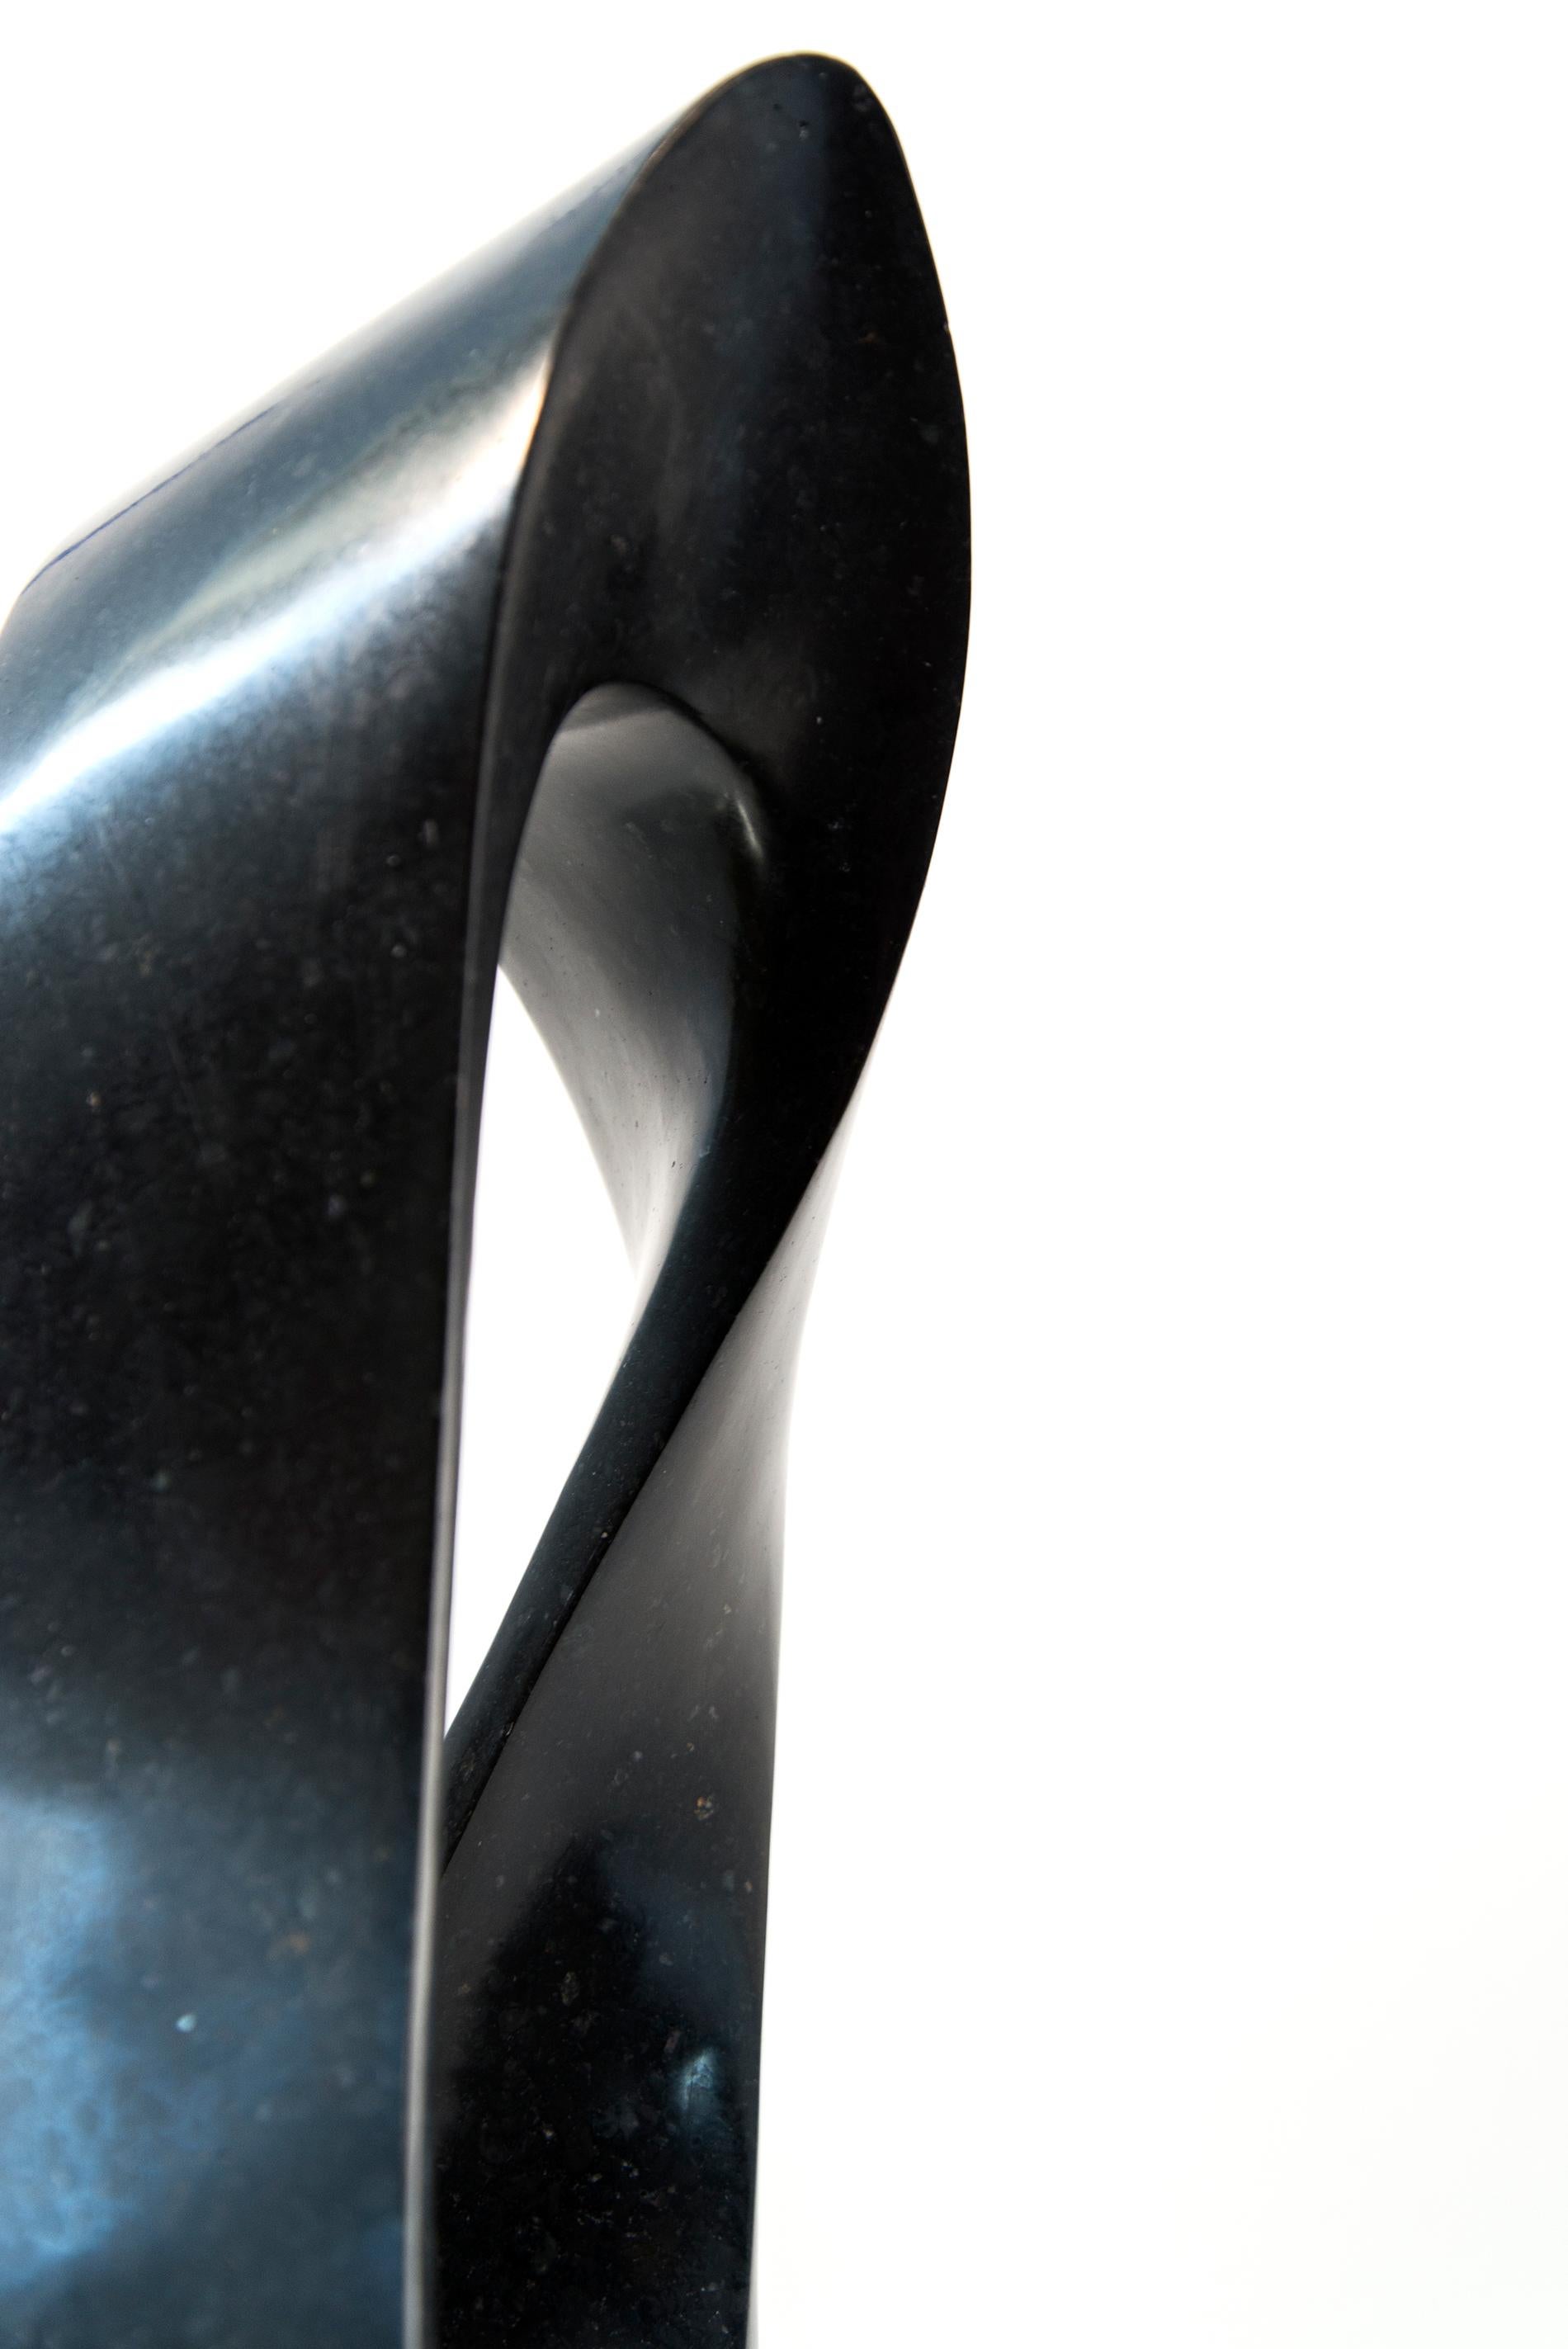 Mobius Minor 1/50 - dark, smooth, polished, abstract, black granite sculpture - Contemporary Sculpture by Jeremy Guy